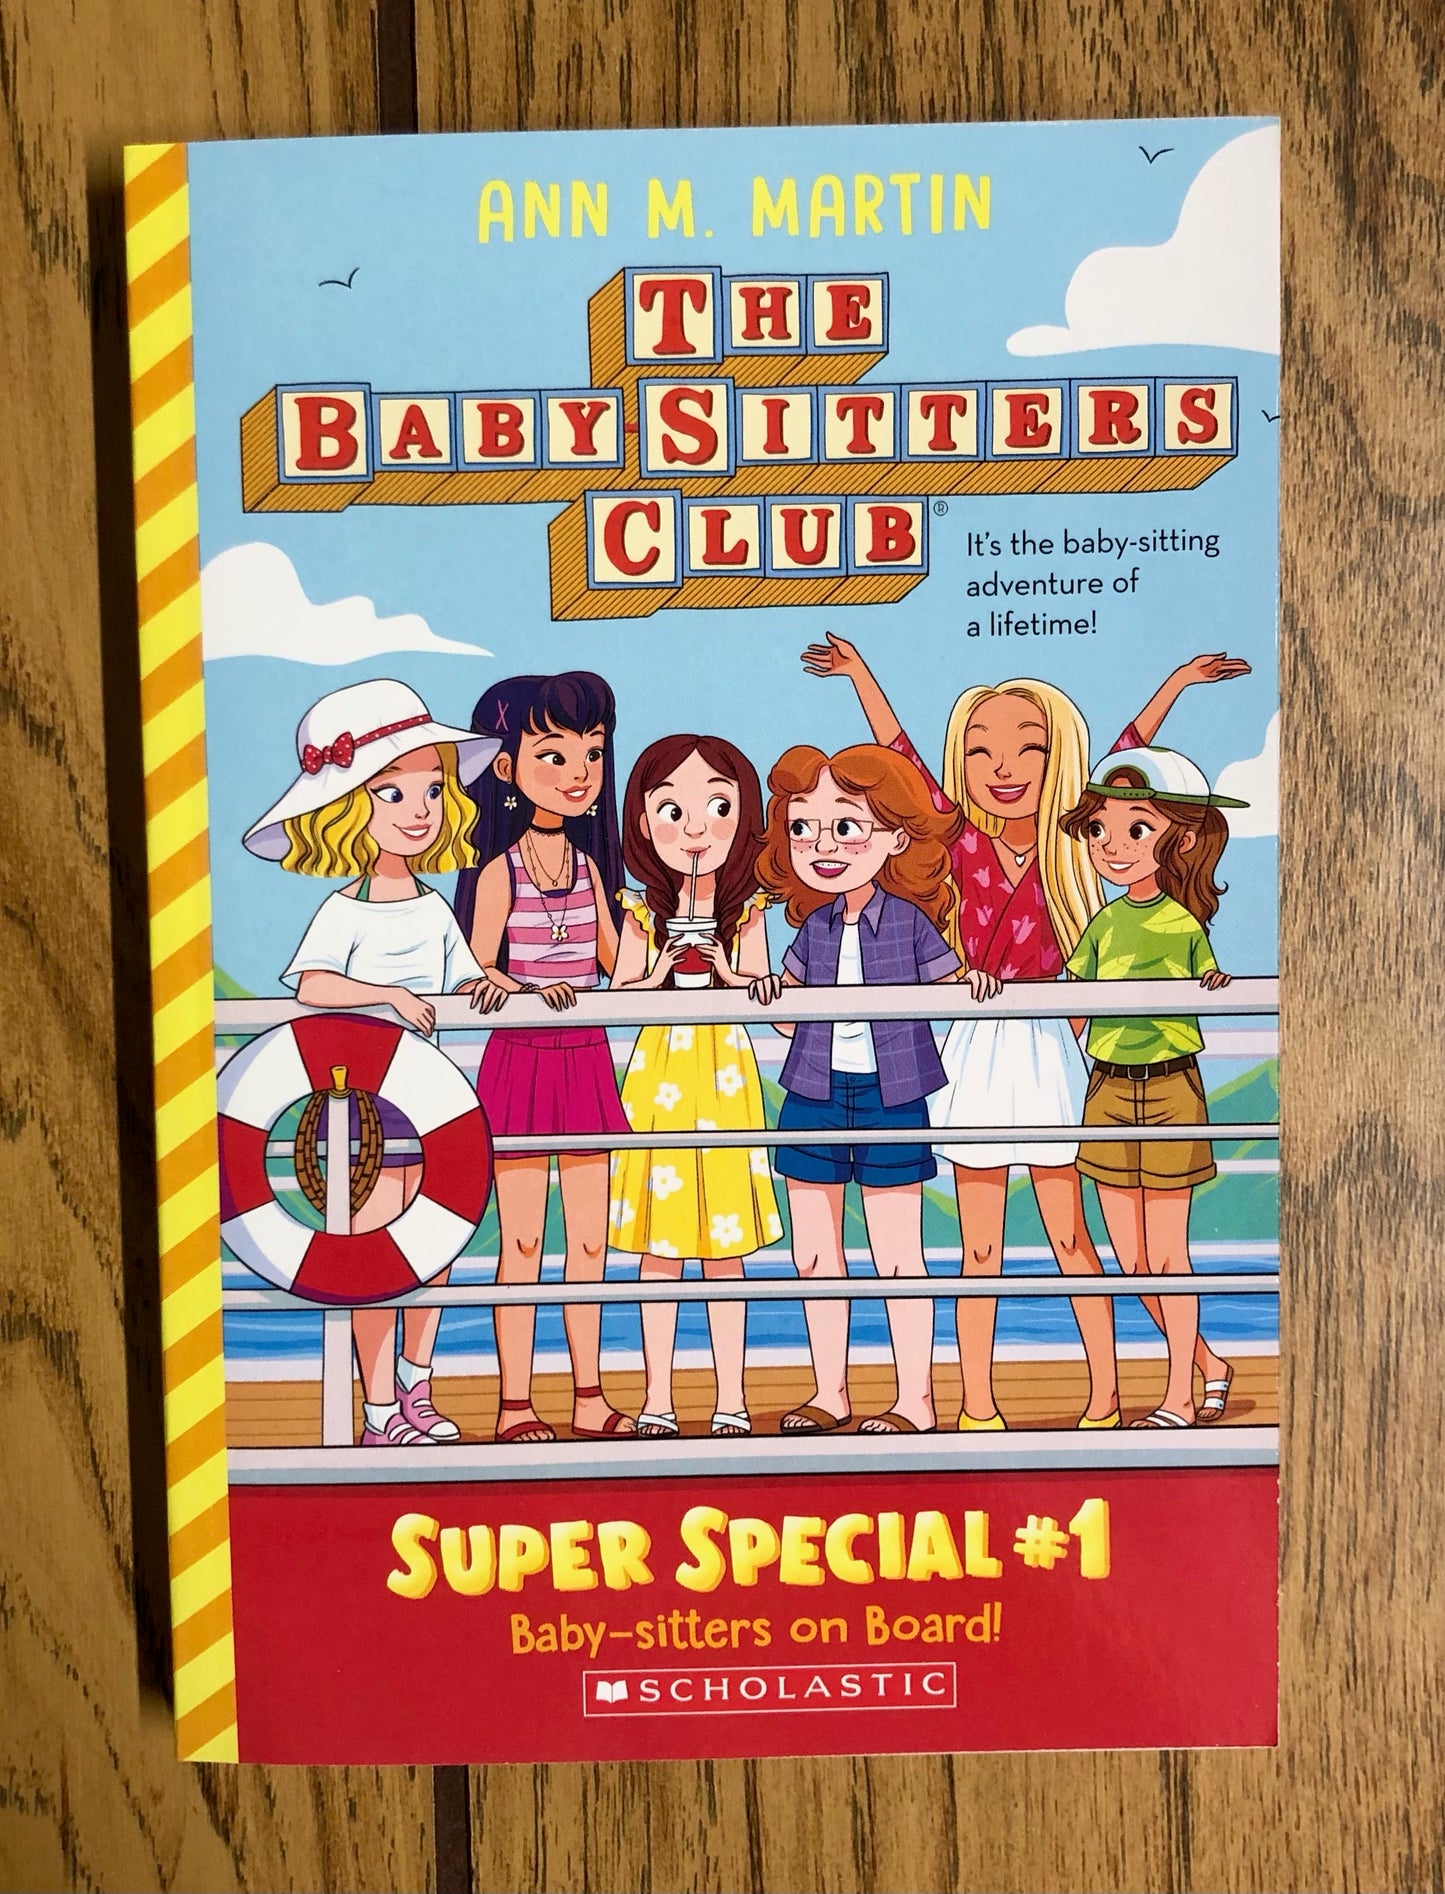 The Baby-Sitter's Club Super Special (#1): Baby-Sitters on Board!